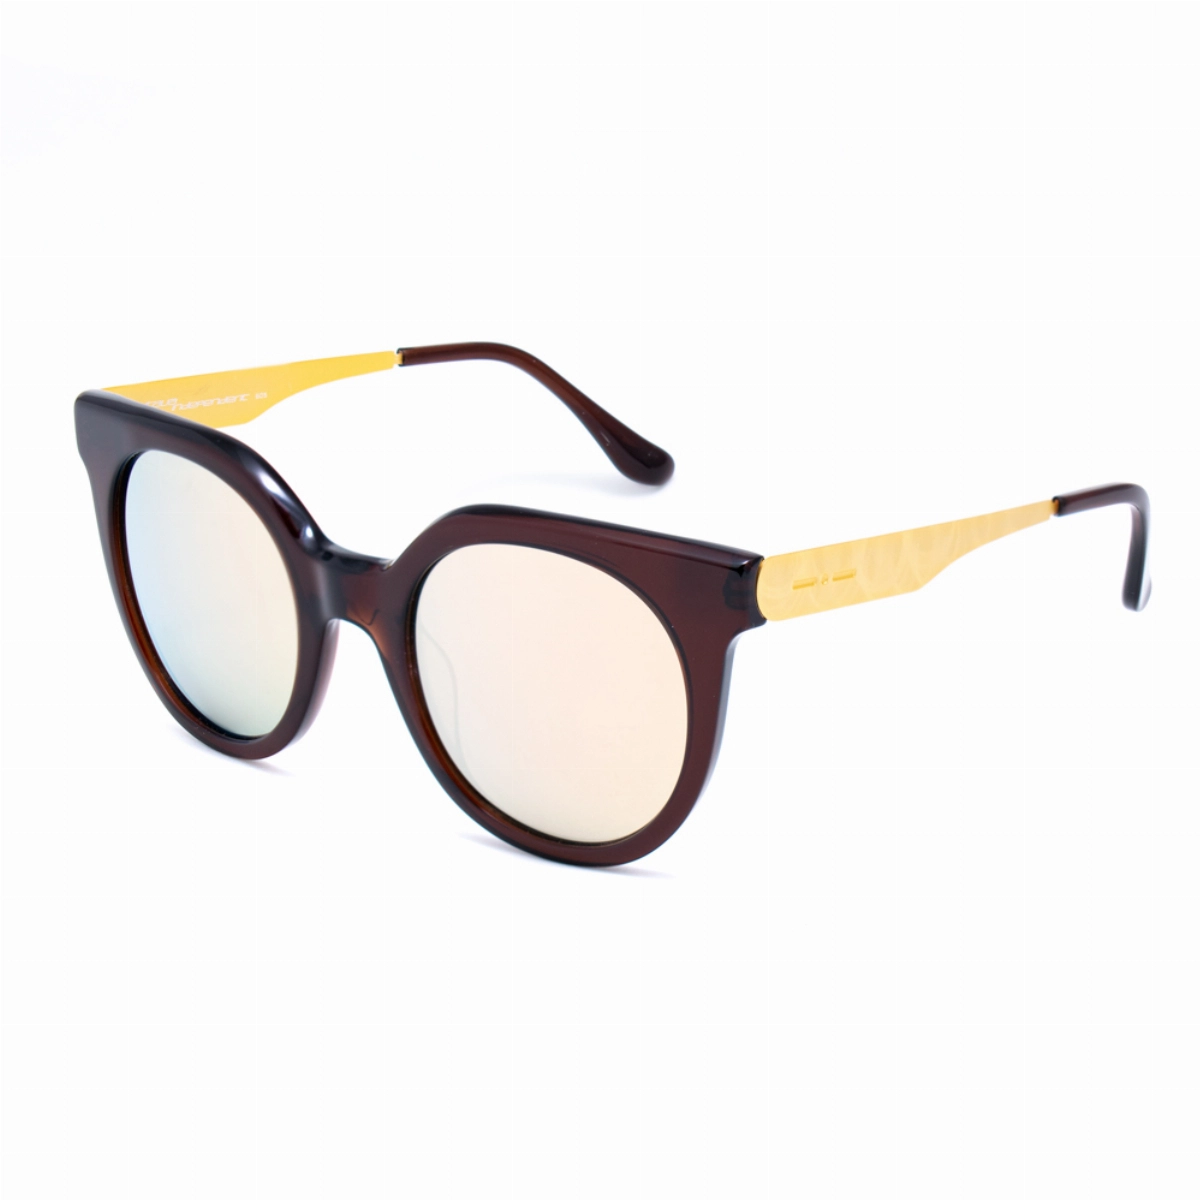 GLASSES OF WOMEN S ITALIA INDEPENDENT 0801-044-ACE